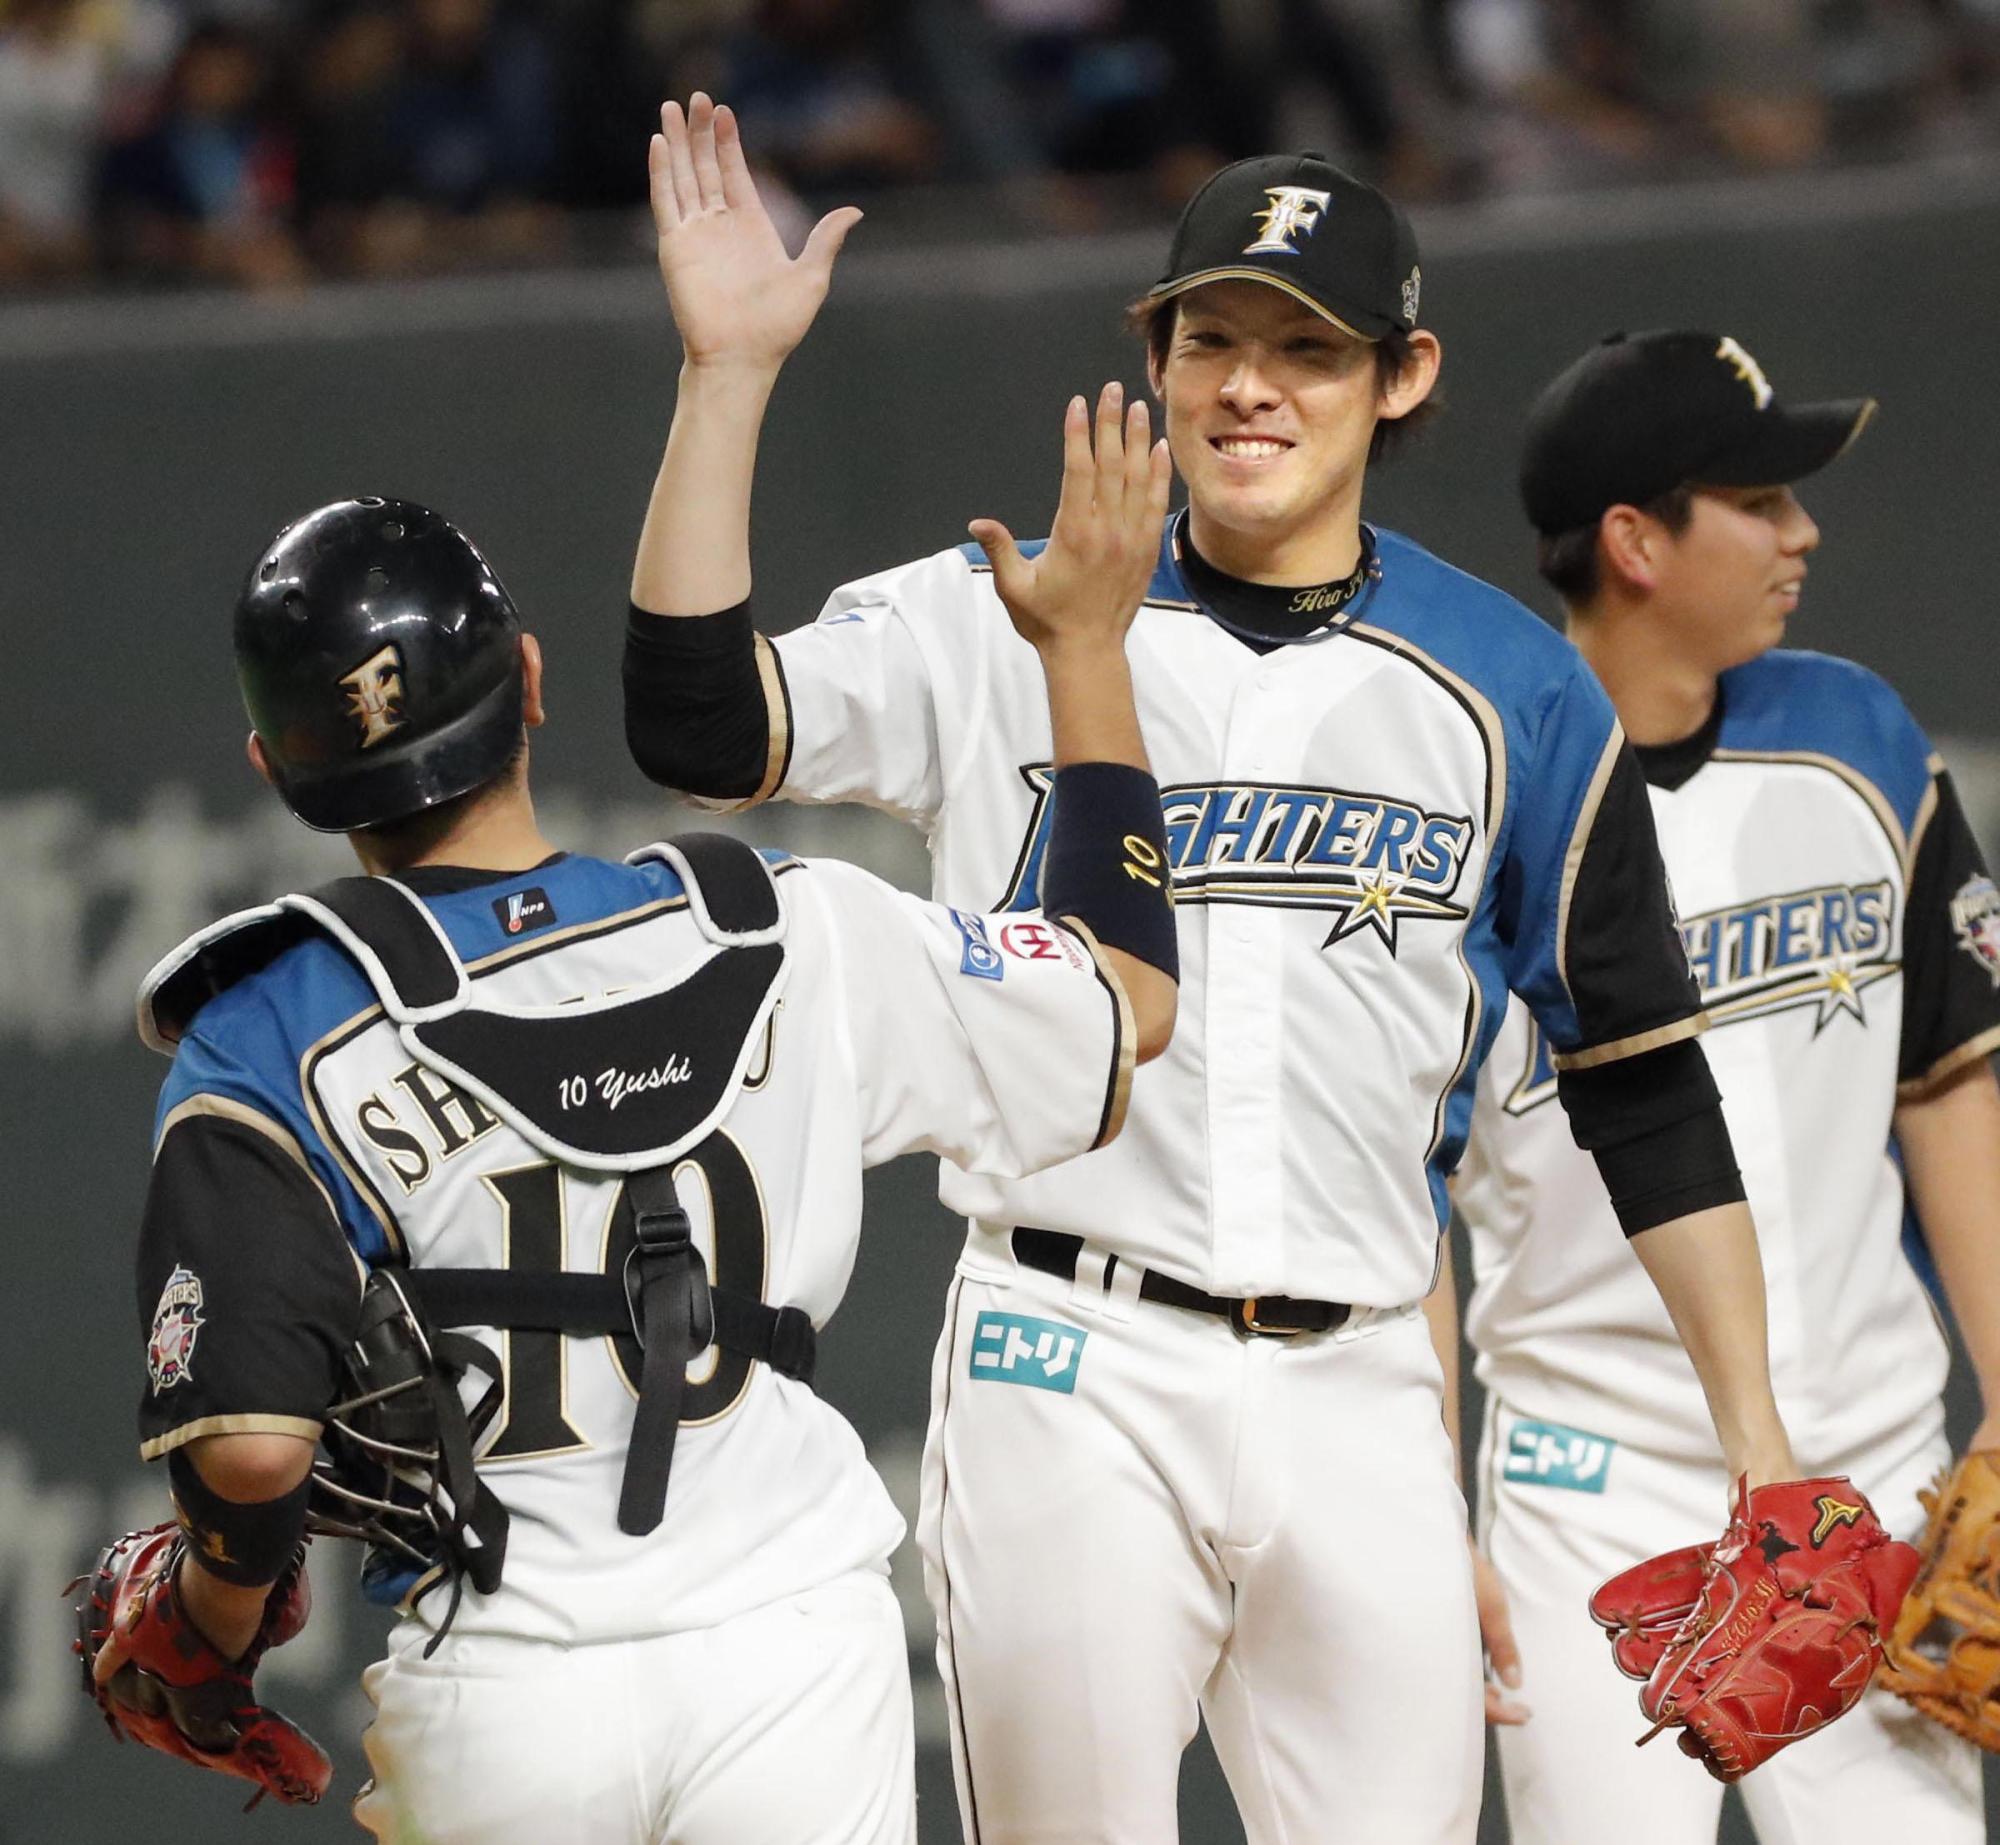 Hirotoshi Takanashi tosses 91-pitch complete game to help Fighters